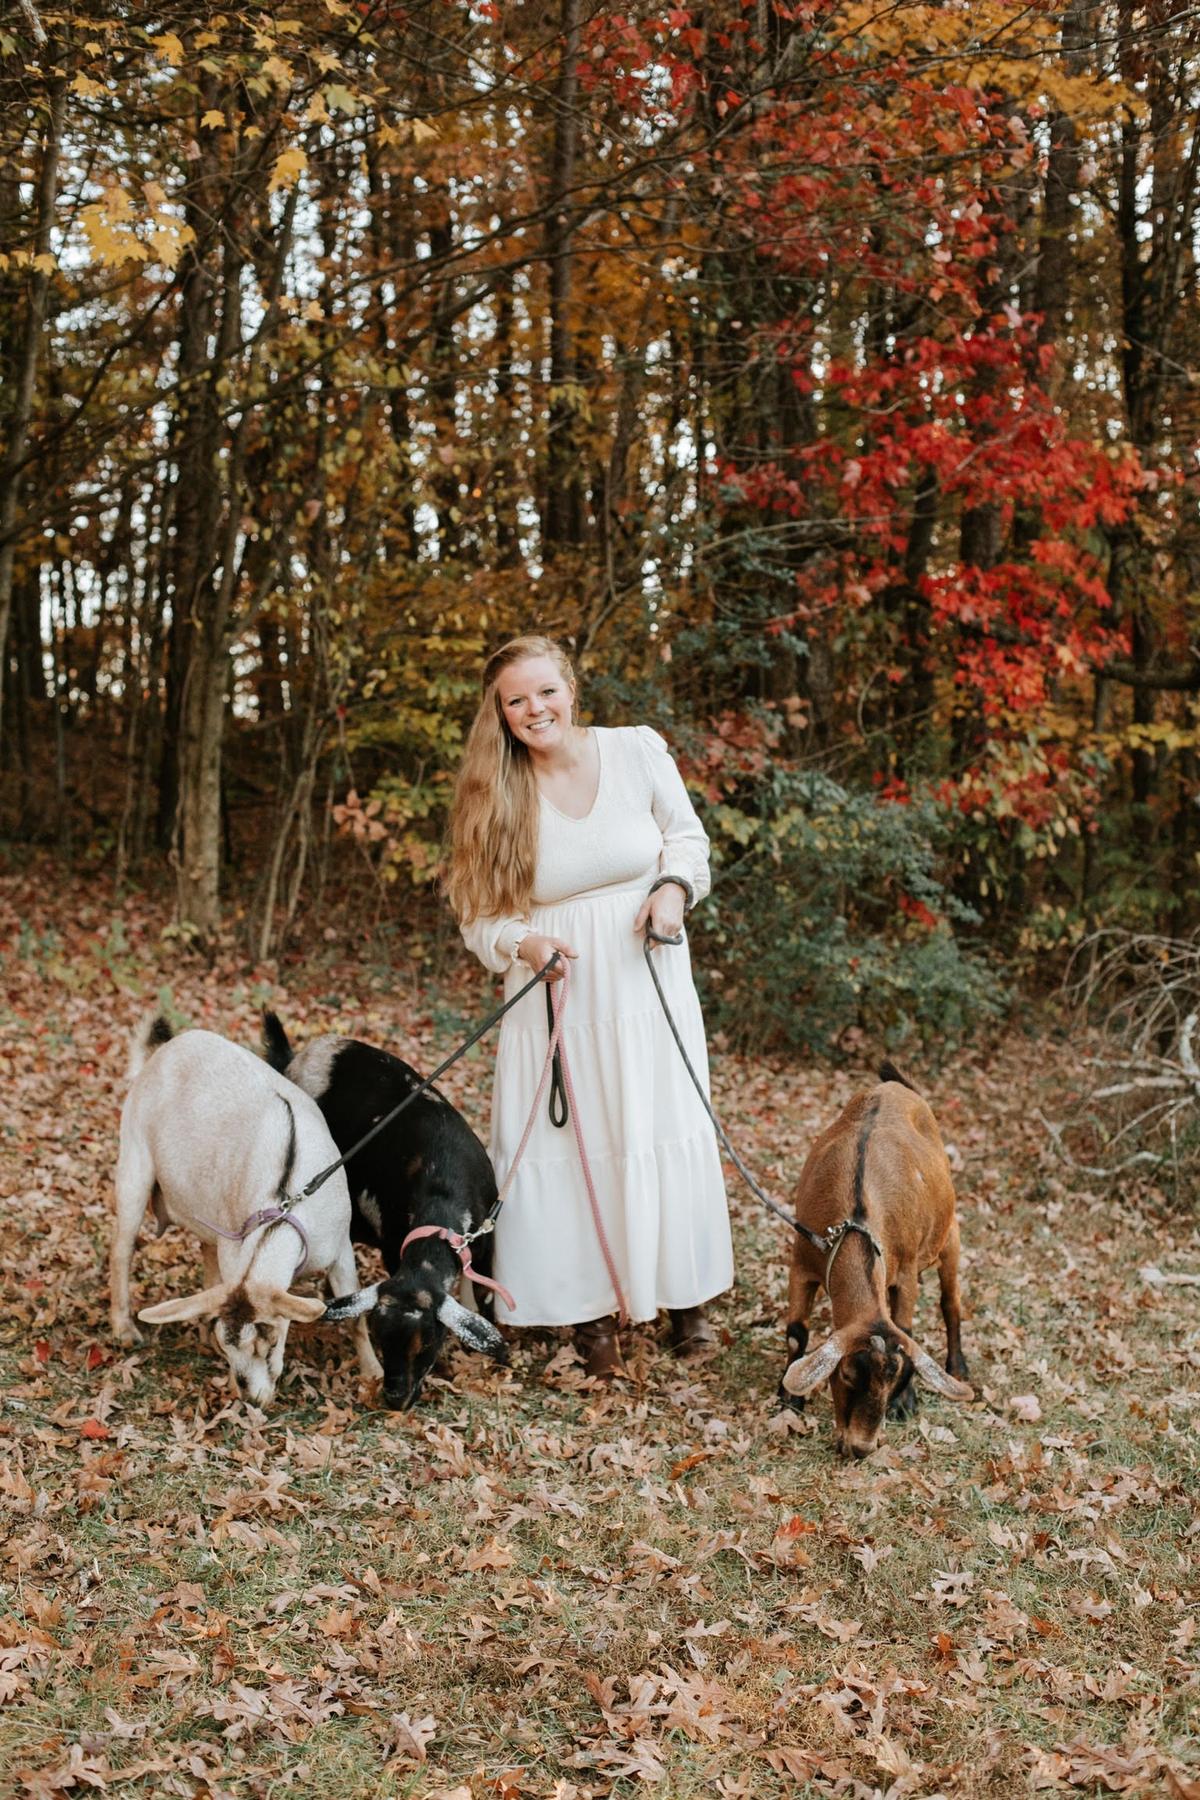 Cortney with her goats. (Courtesy of The Tiffaney Lawson Company)